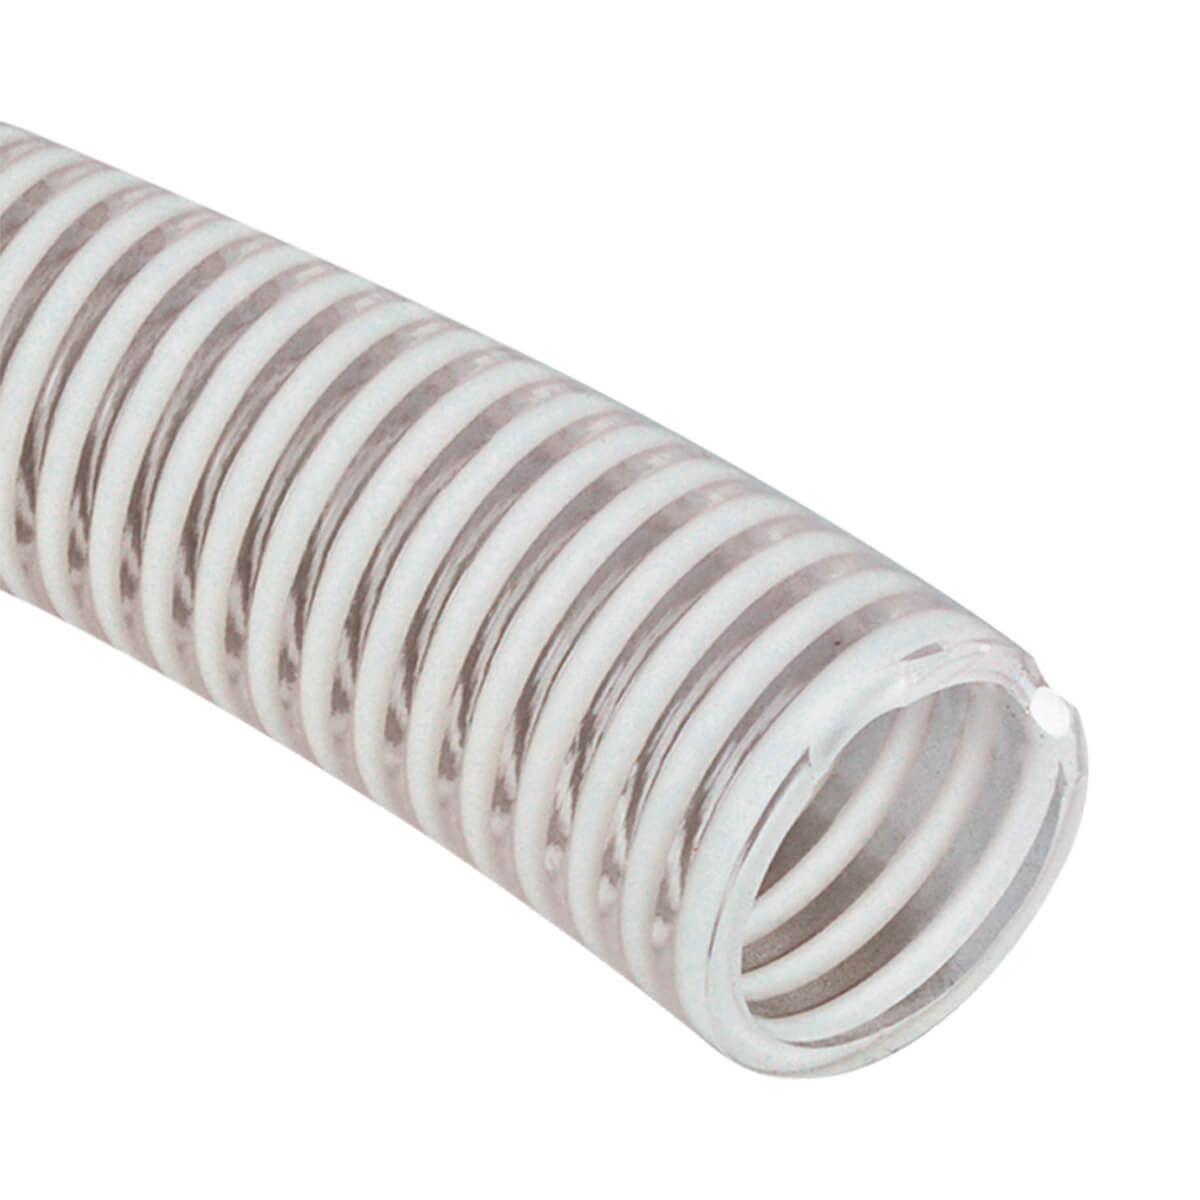 Clear PVC Suction Hose — Bulk/Uncoupled - 3-in - Price Per Ft